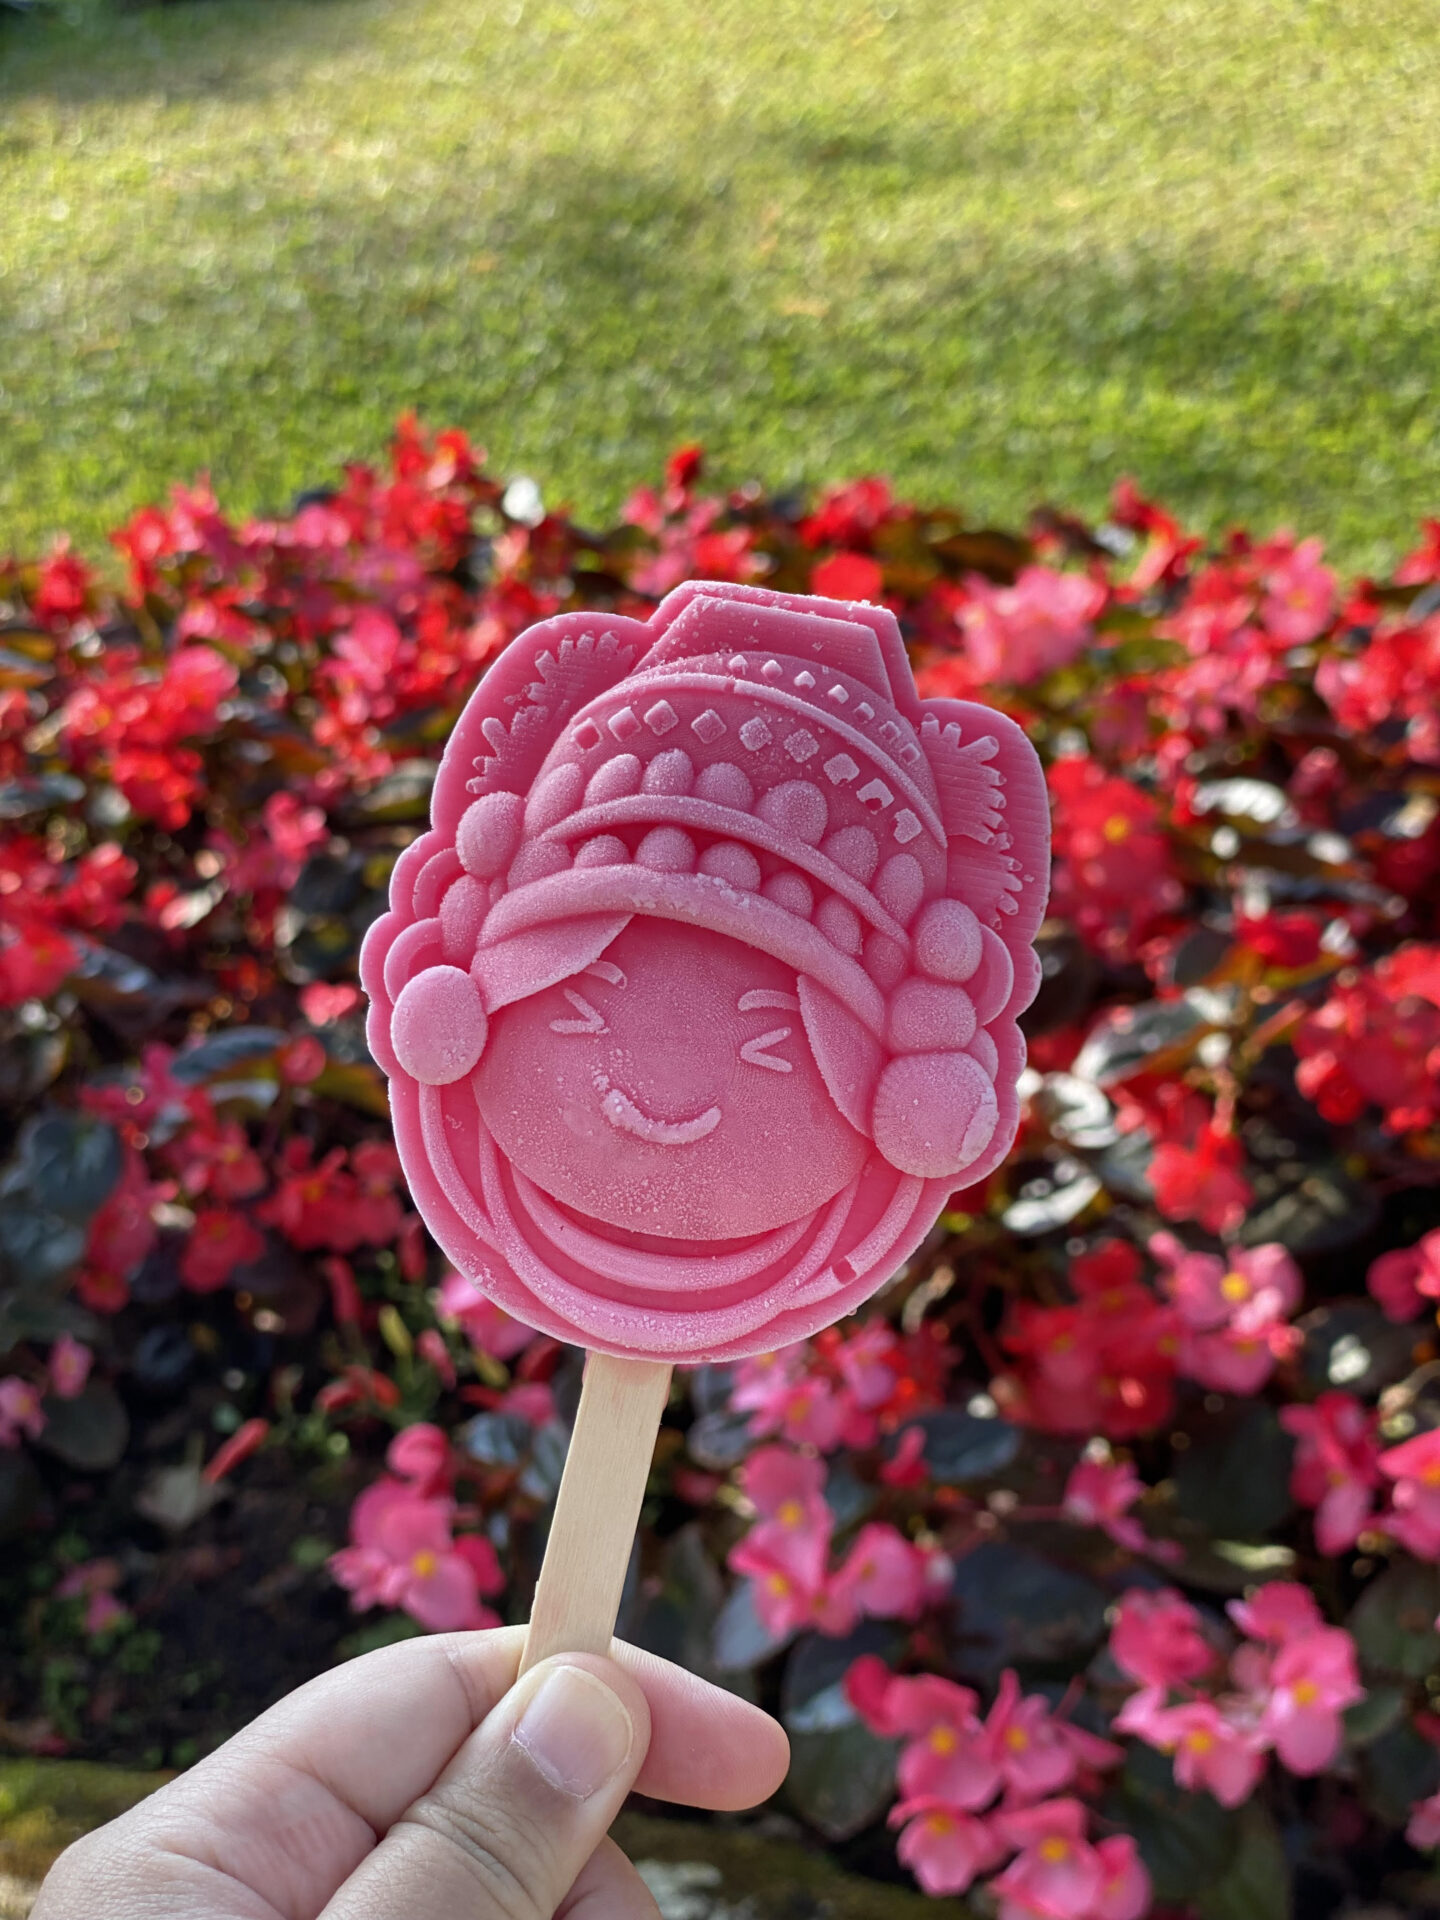 A strawberry milk ice cream inspired by the hill tribe costume. (Photo: Anya C.)